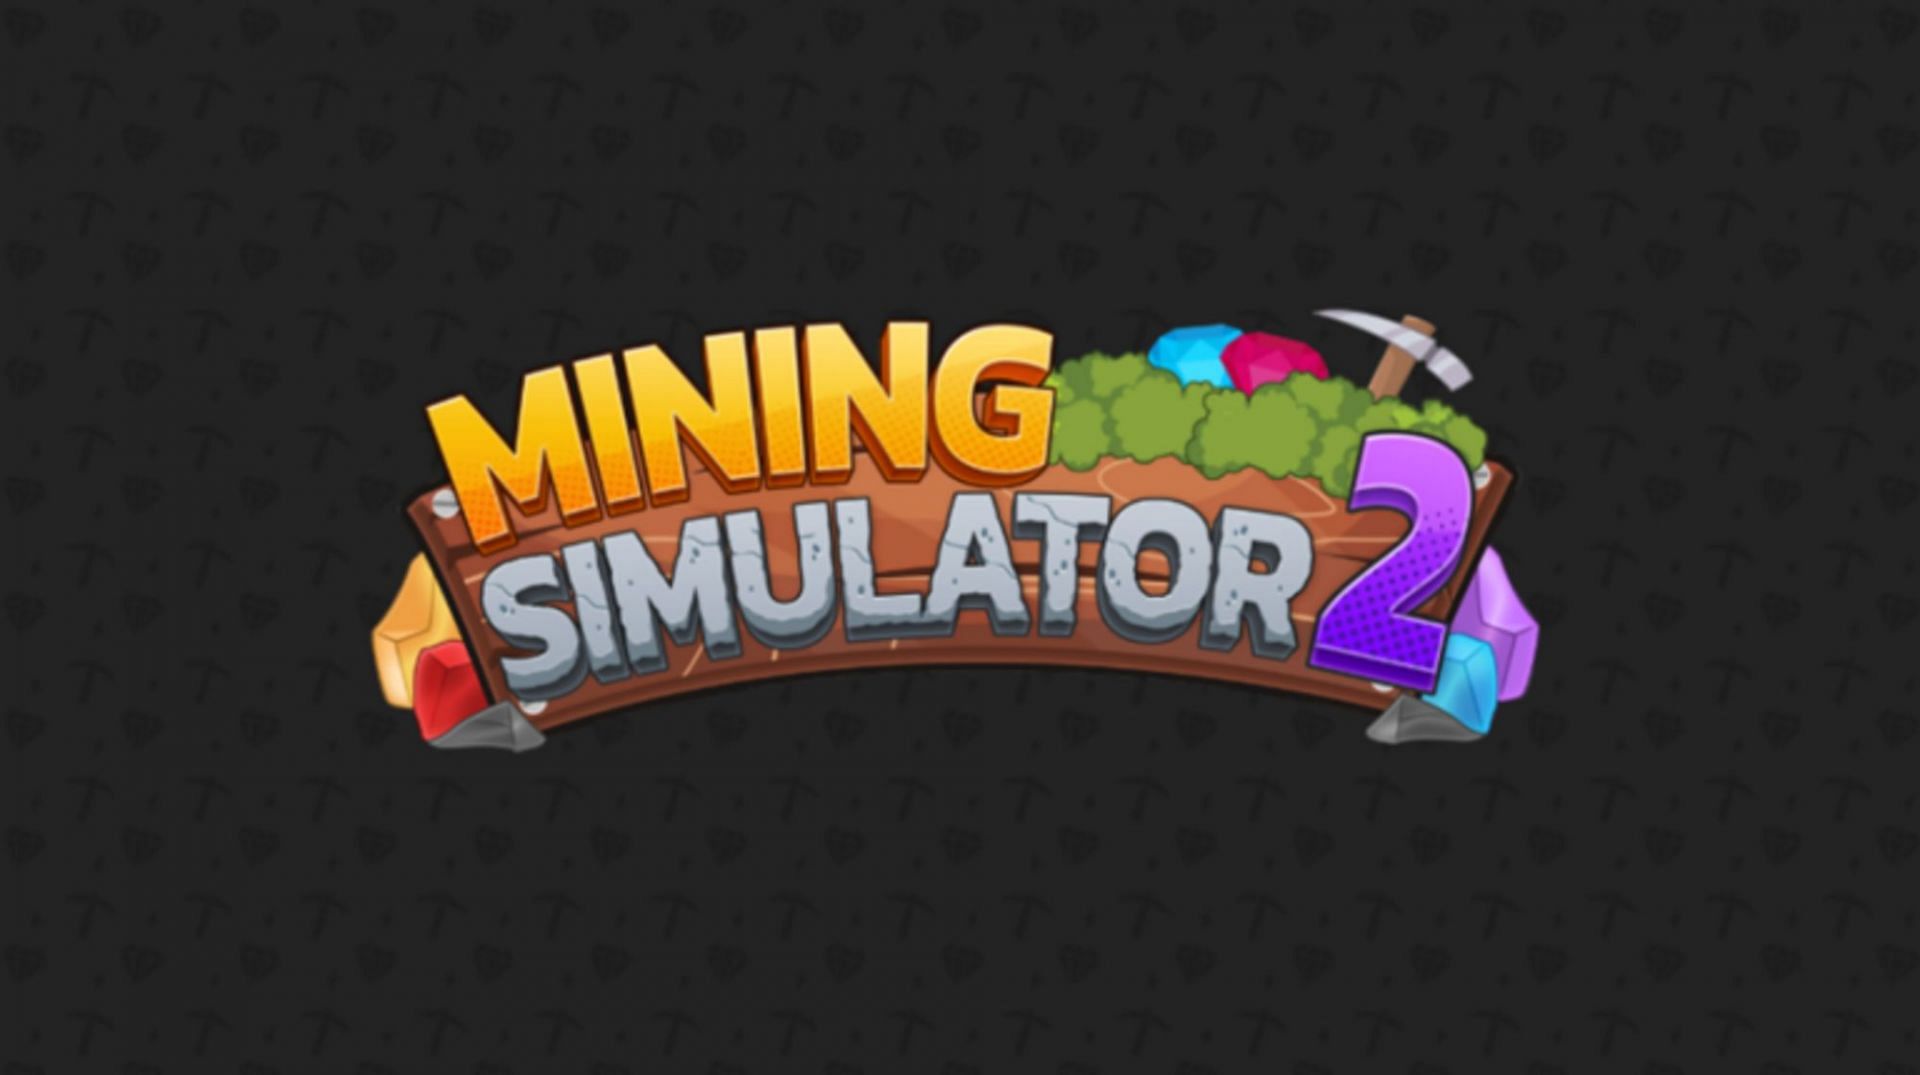 Become the best miner in the world of Mining Simulator 2 (Image via Roblox)